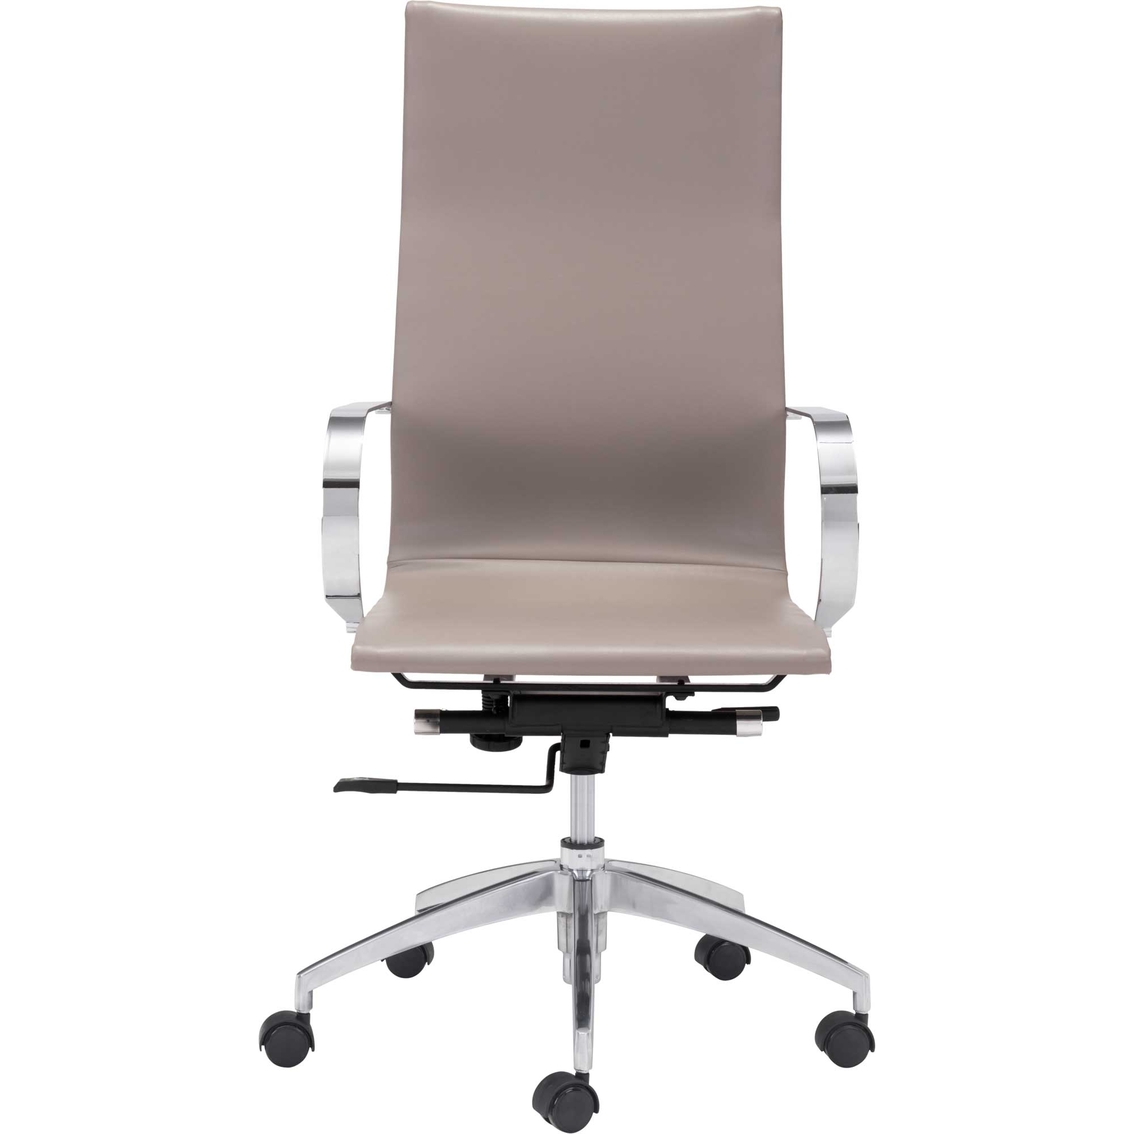 Zuo Modern Glider Hi Back Office Chair - Image 3 of 8